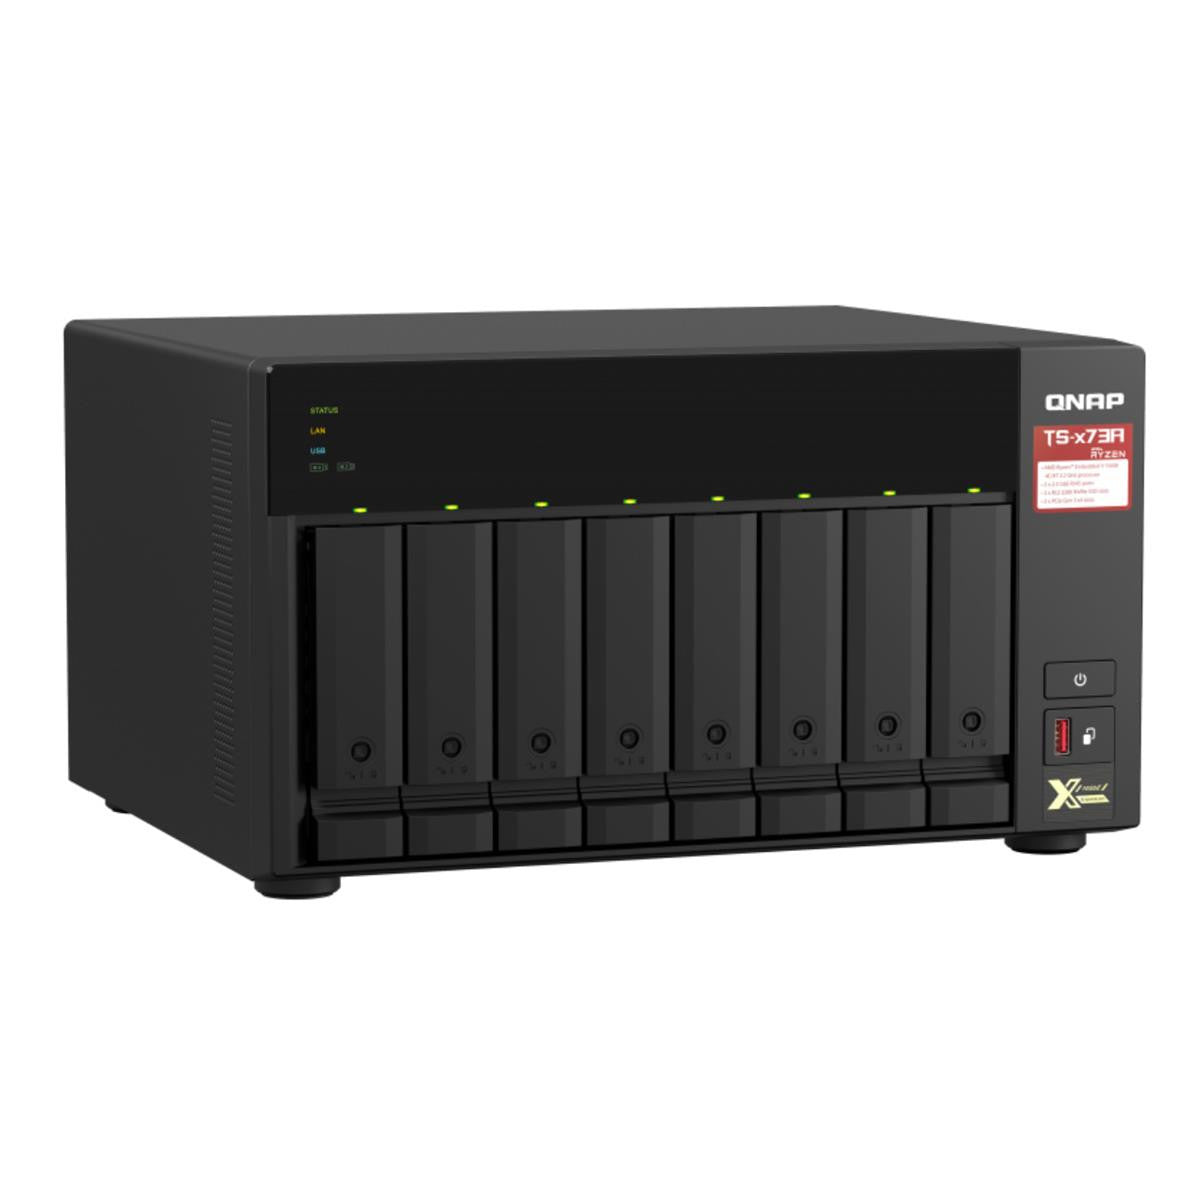 QNAP TS-873A 8-BAY NAS with 32GB DDR4 RAM and 24TB (8x3TB) Seagate Ironwolf NAS Drives Fully Assembled and Tested